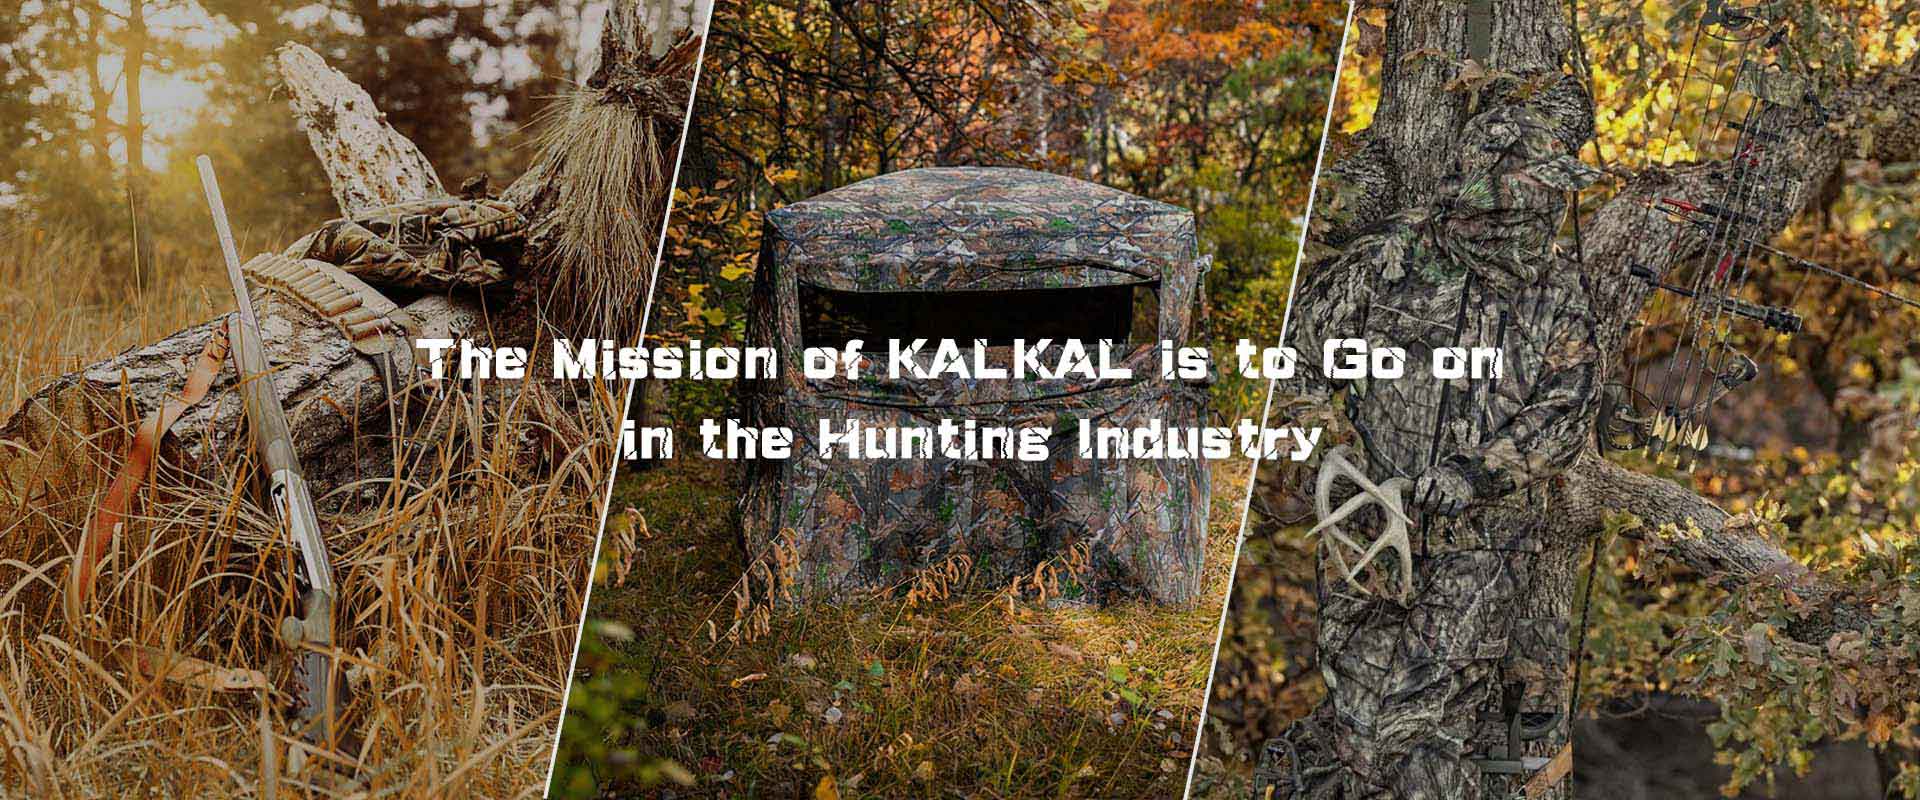 the mission of kalkal is go on in the hunting